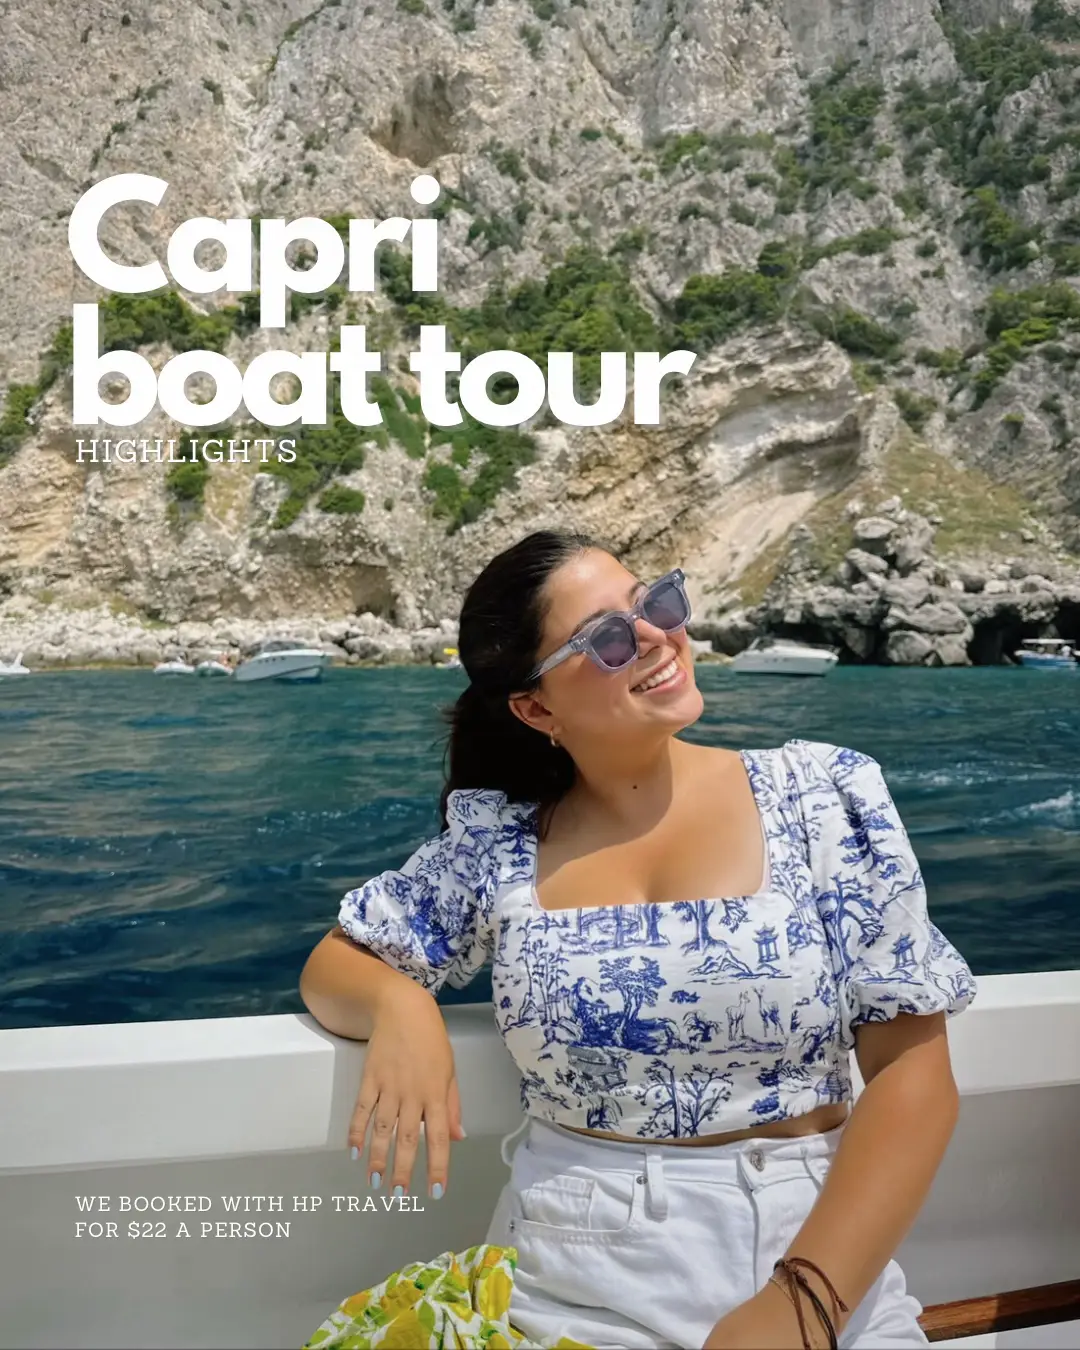 Capri Island Boat Tour: Explore Stunning Caves and Crystal-clear